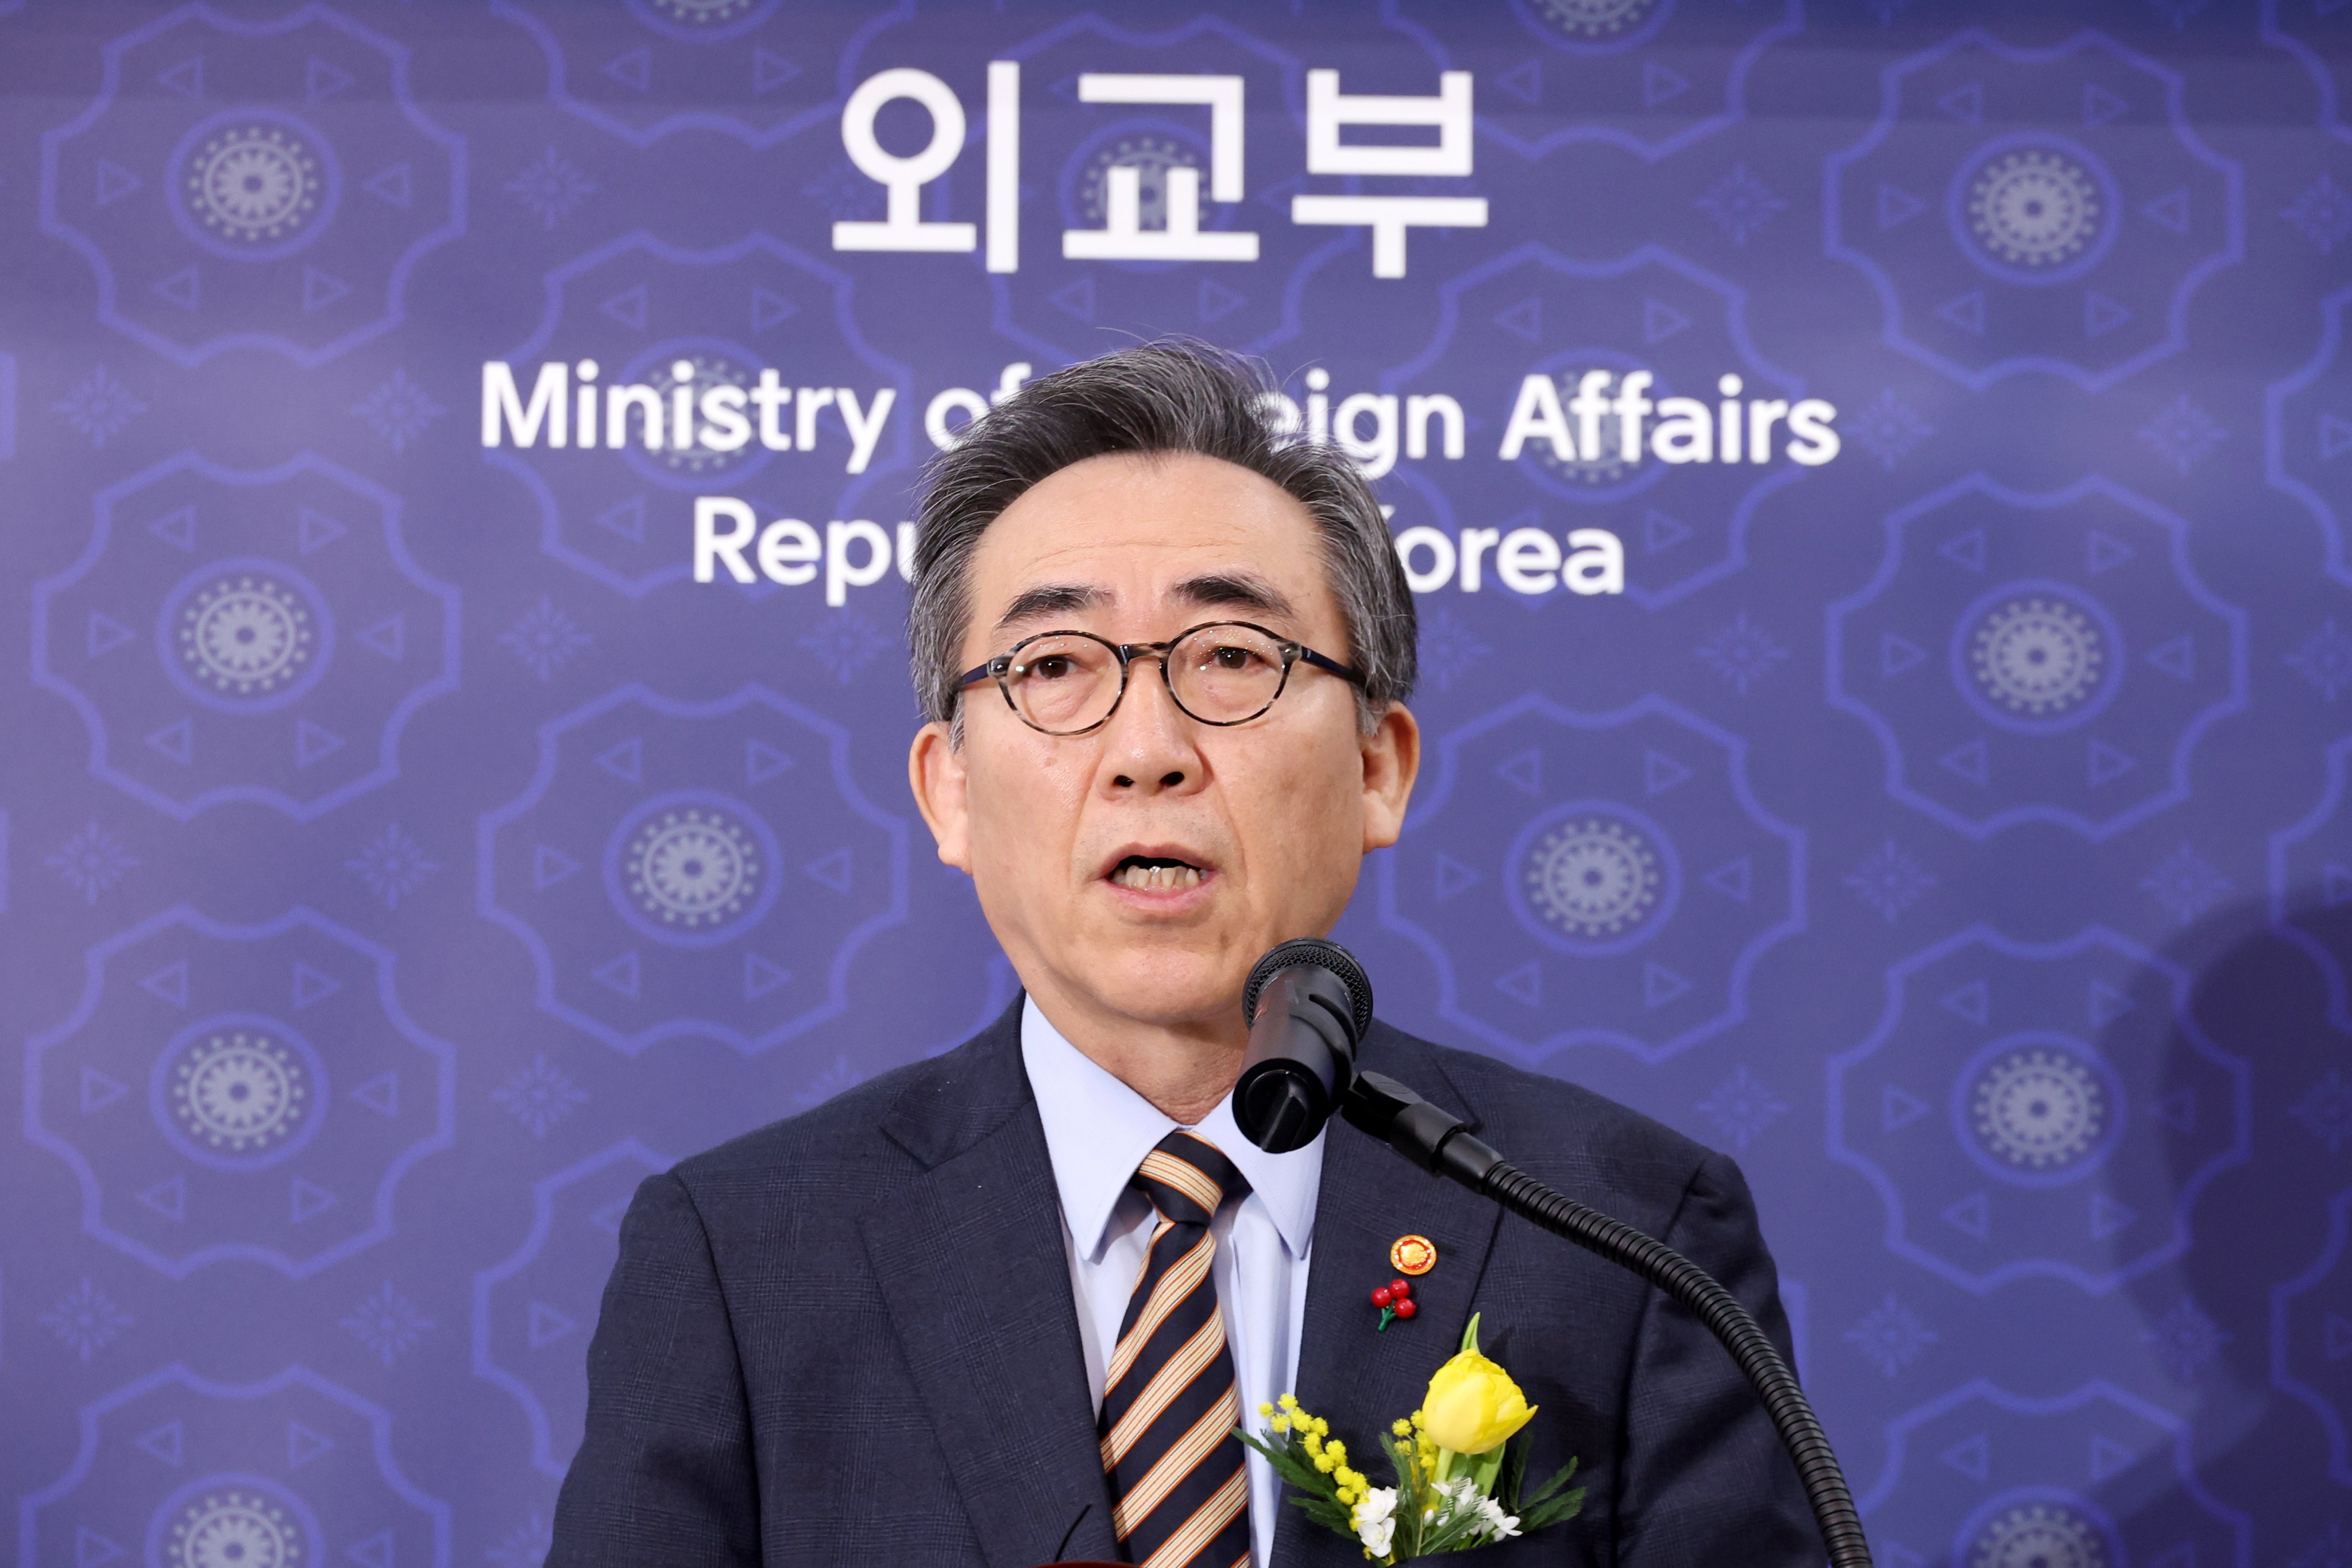 South Korean Foreign Minister Cho Tae-yul did not receive a courtesy call from his Chinese counterpart until nearly a month after he took office – a delay some speculated was the result of strained bilateral ties. Photo: EPA-EFE